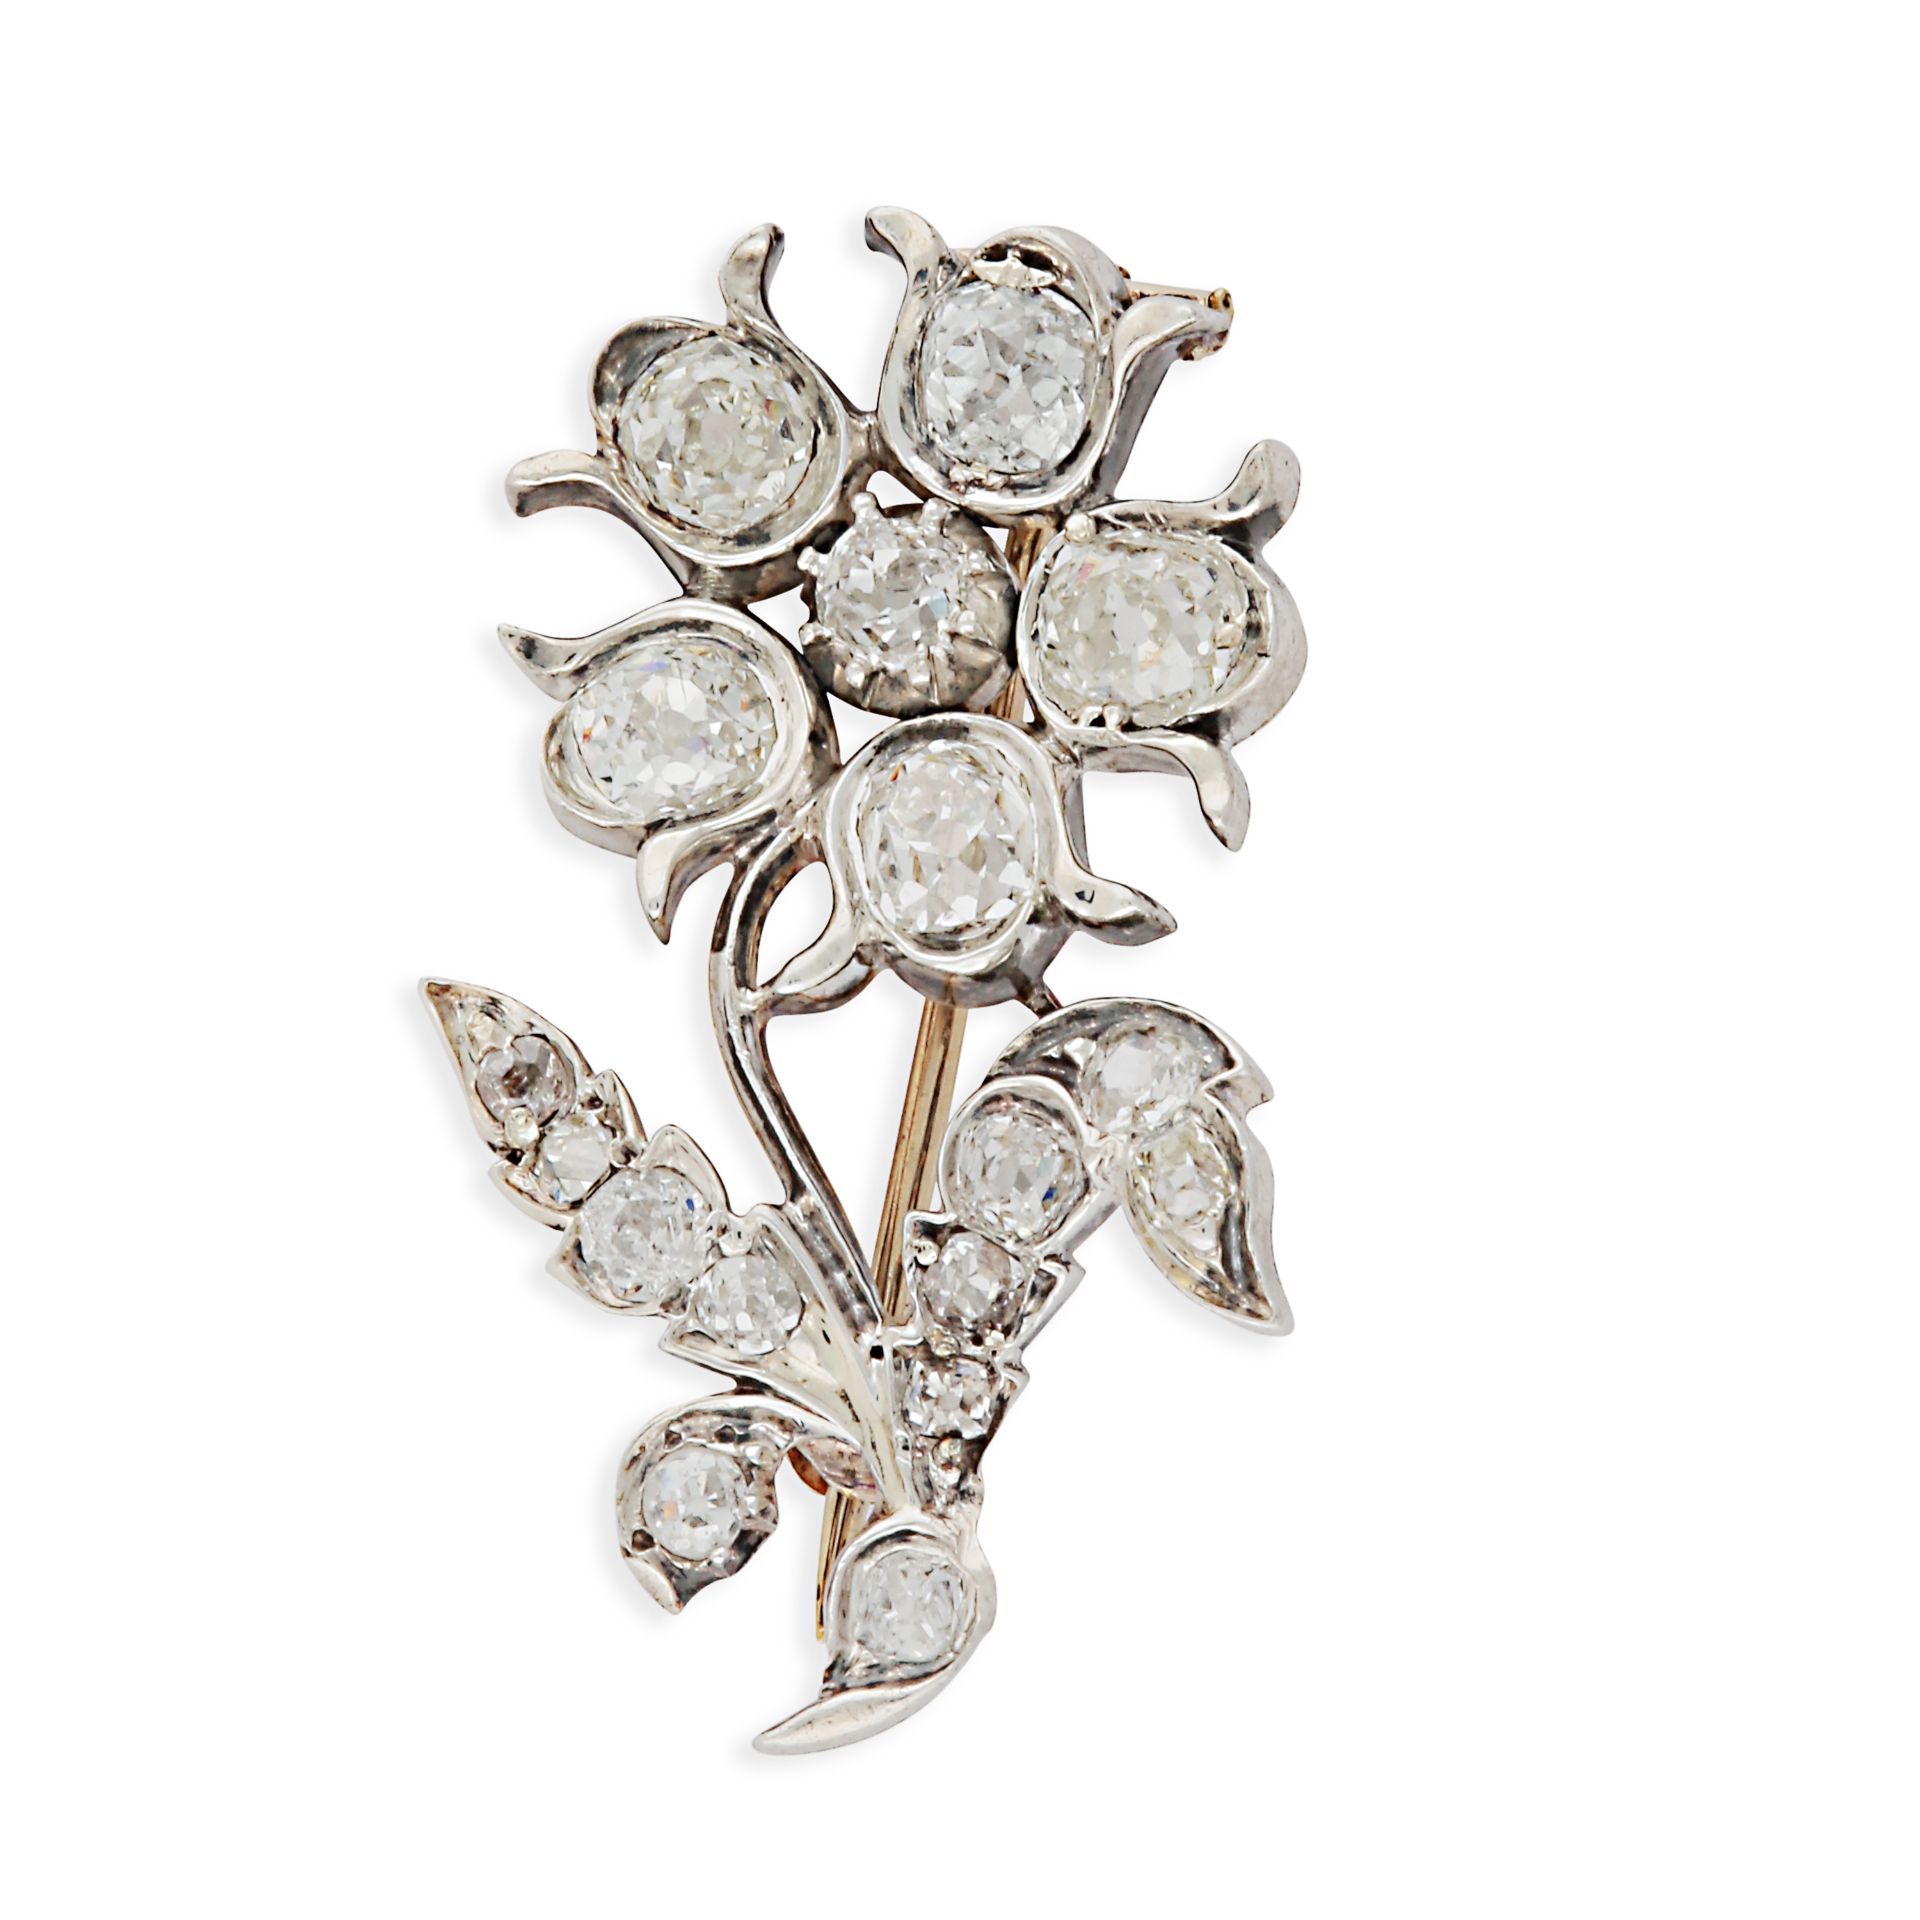 A DIAMOND FLOWER BROOCH designed as a flower set throughout with old cut diamonds, no assay marks...